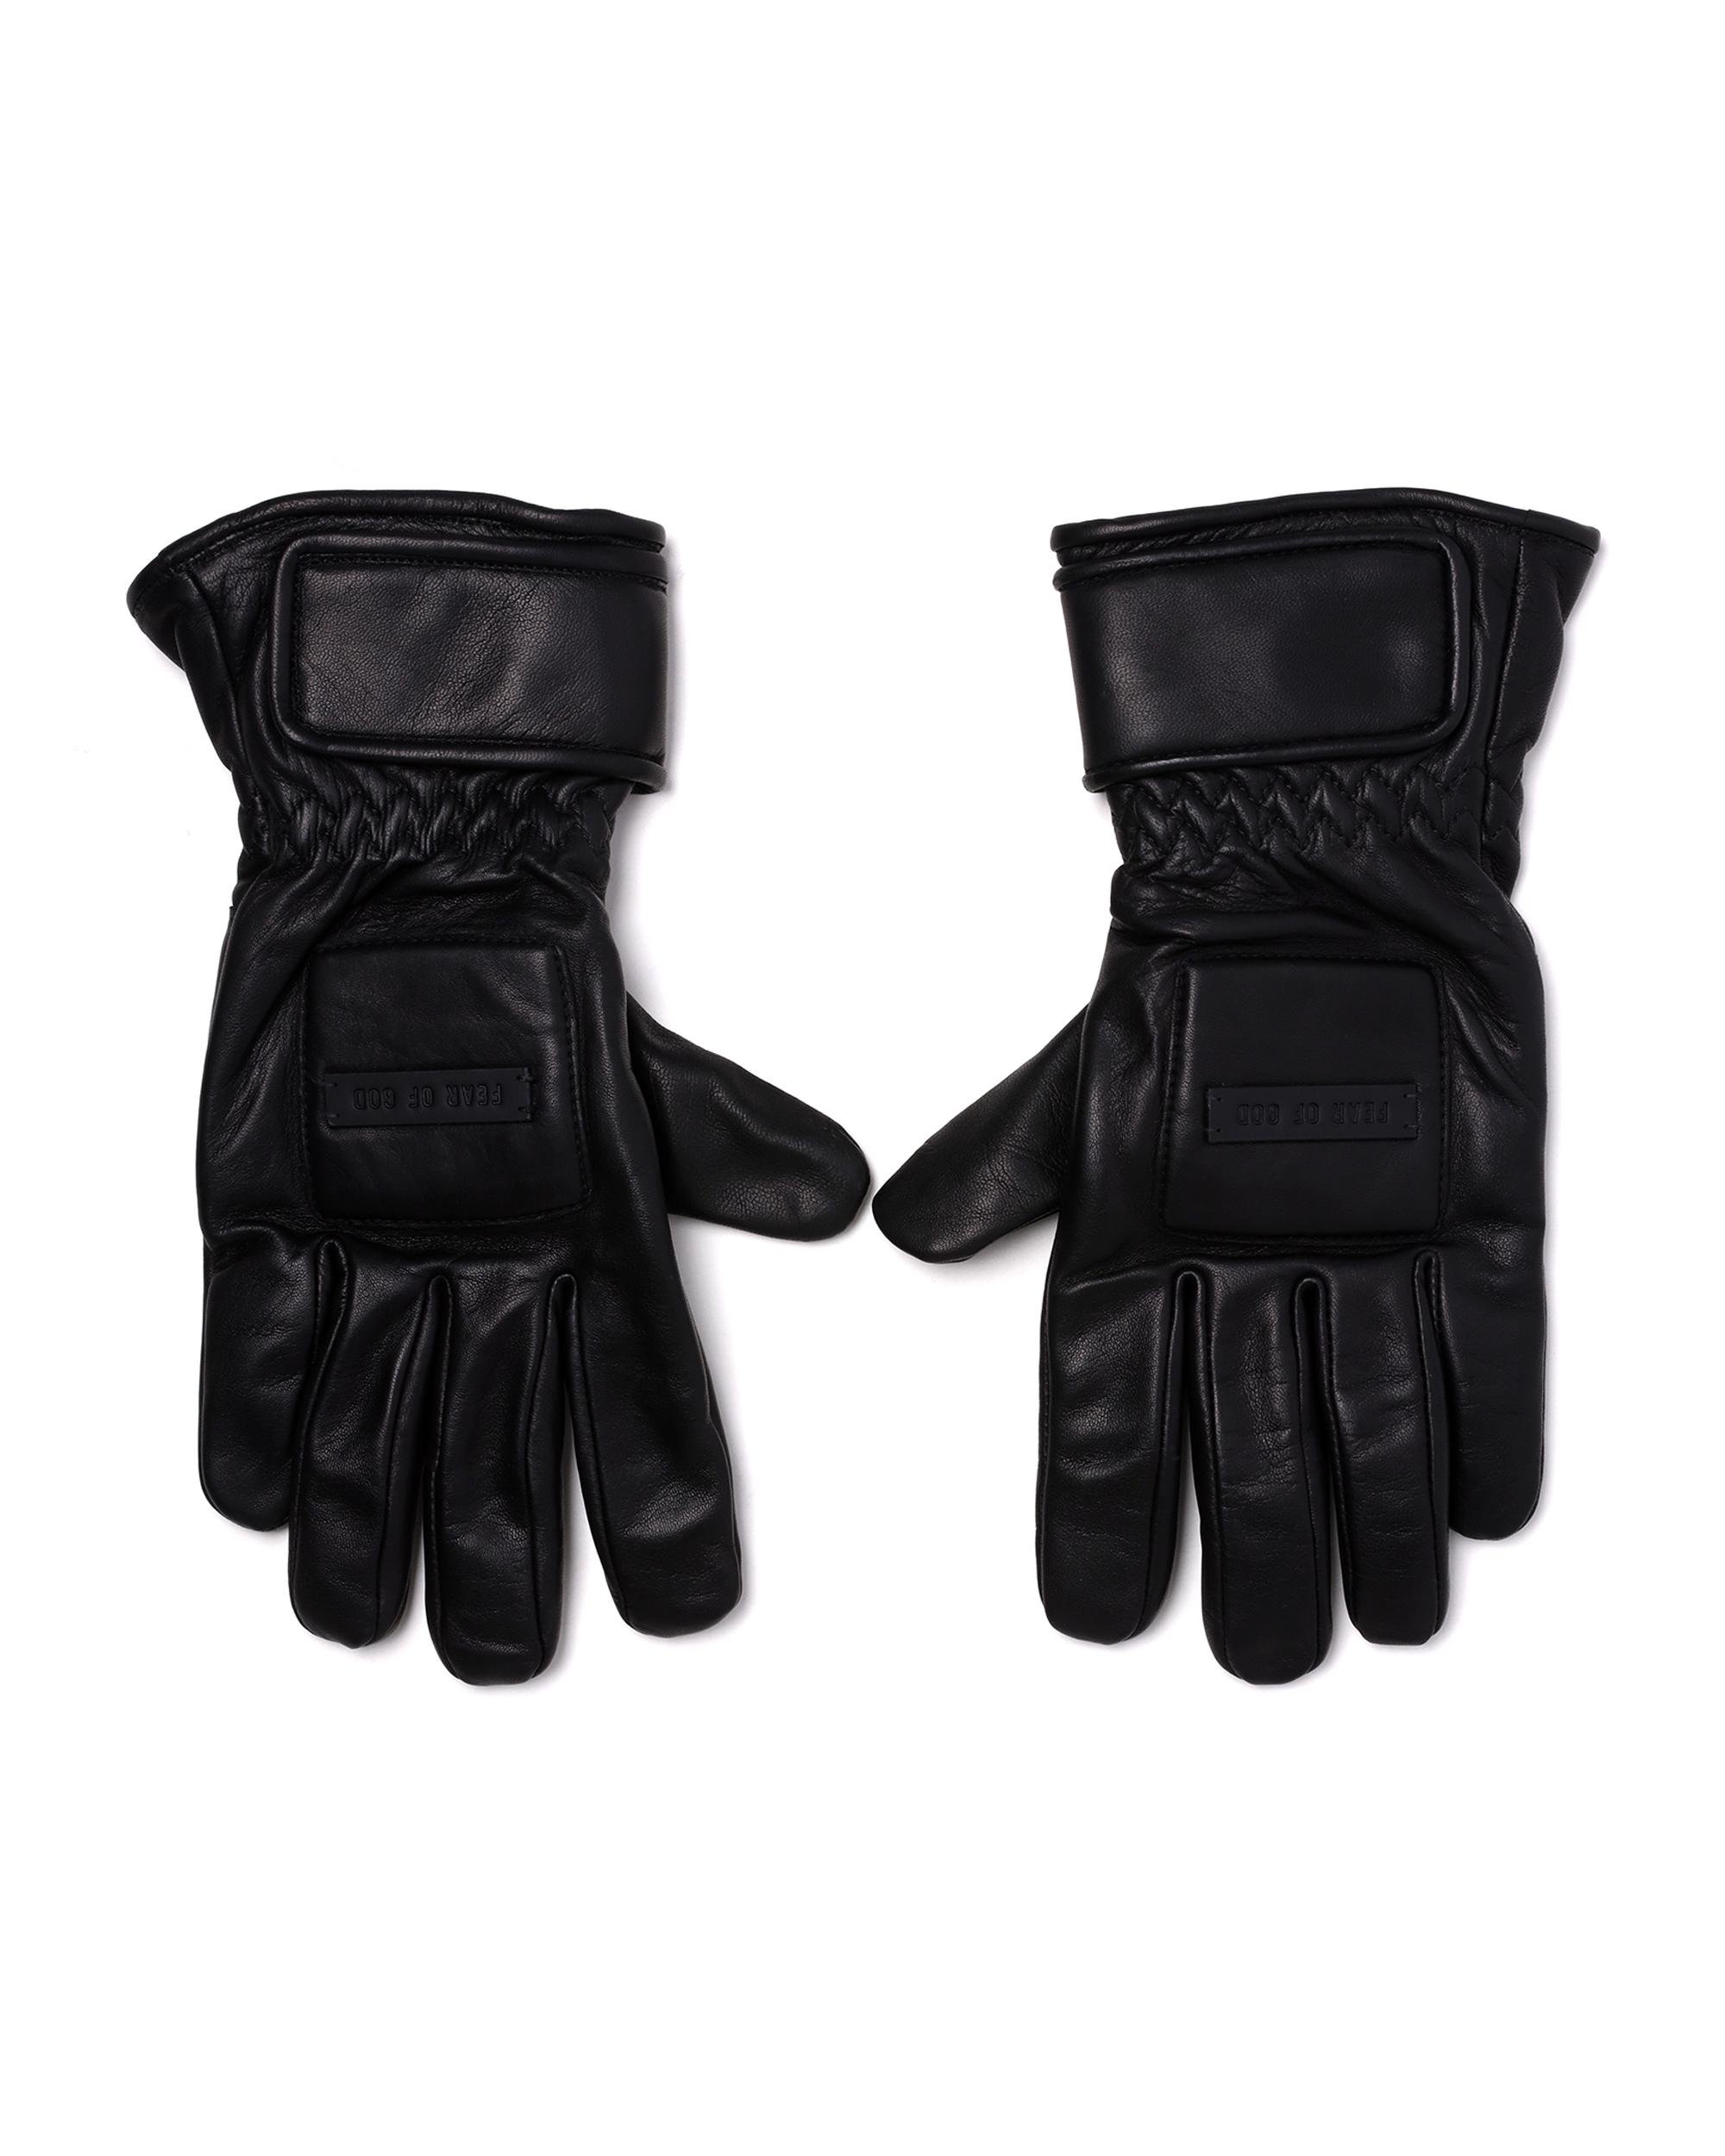 Driver gloves by FEAR OF GOD